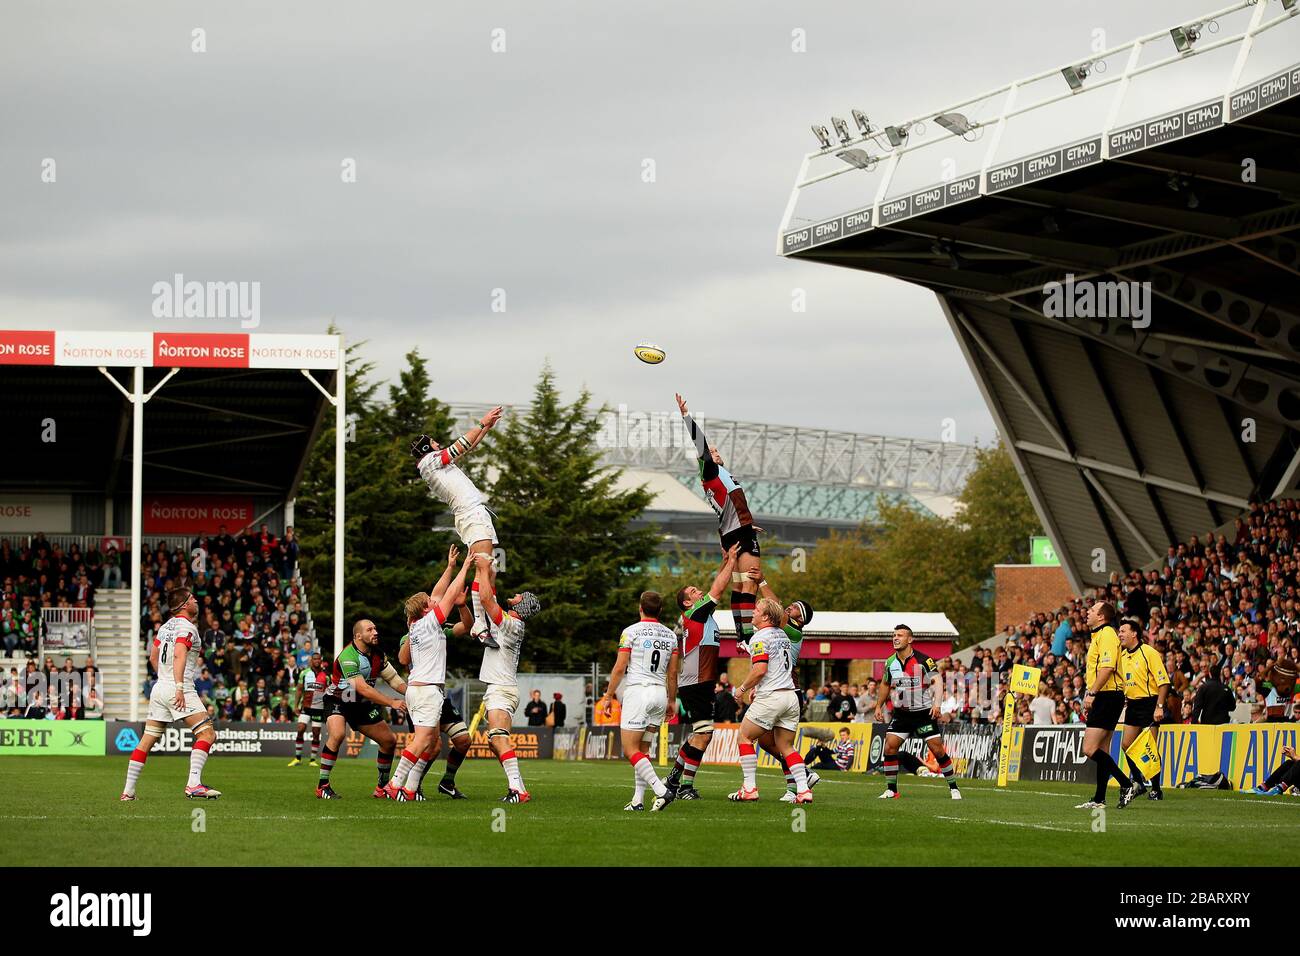 A general view of the match underway as a line out is taken Stock Photo